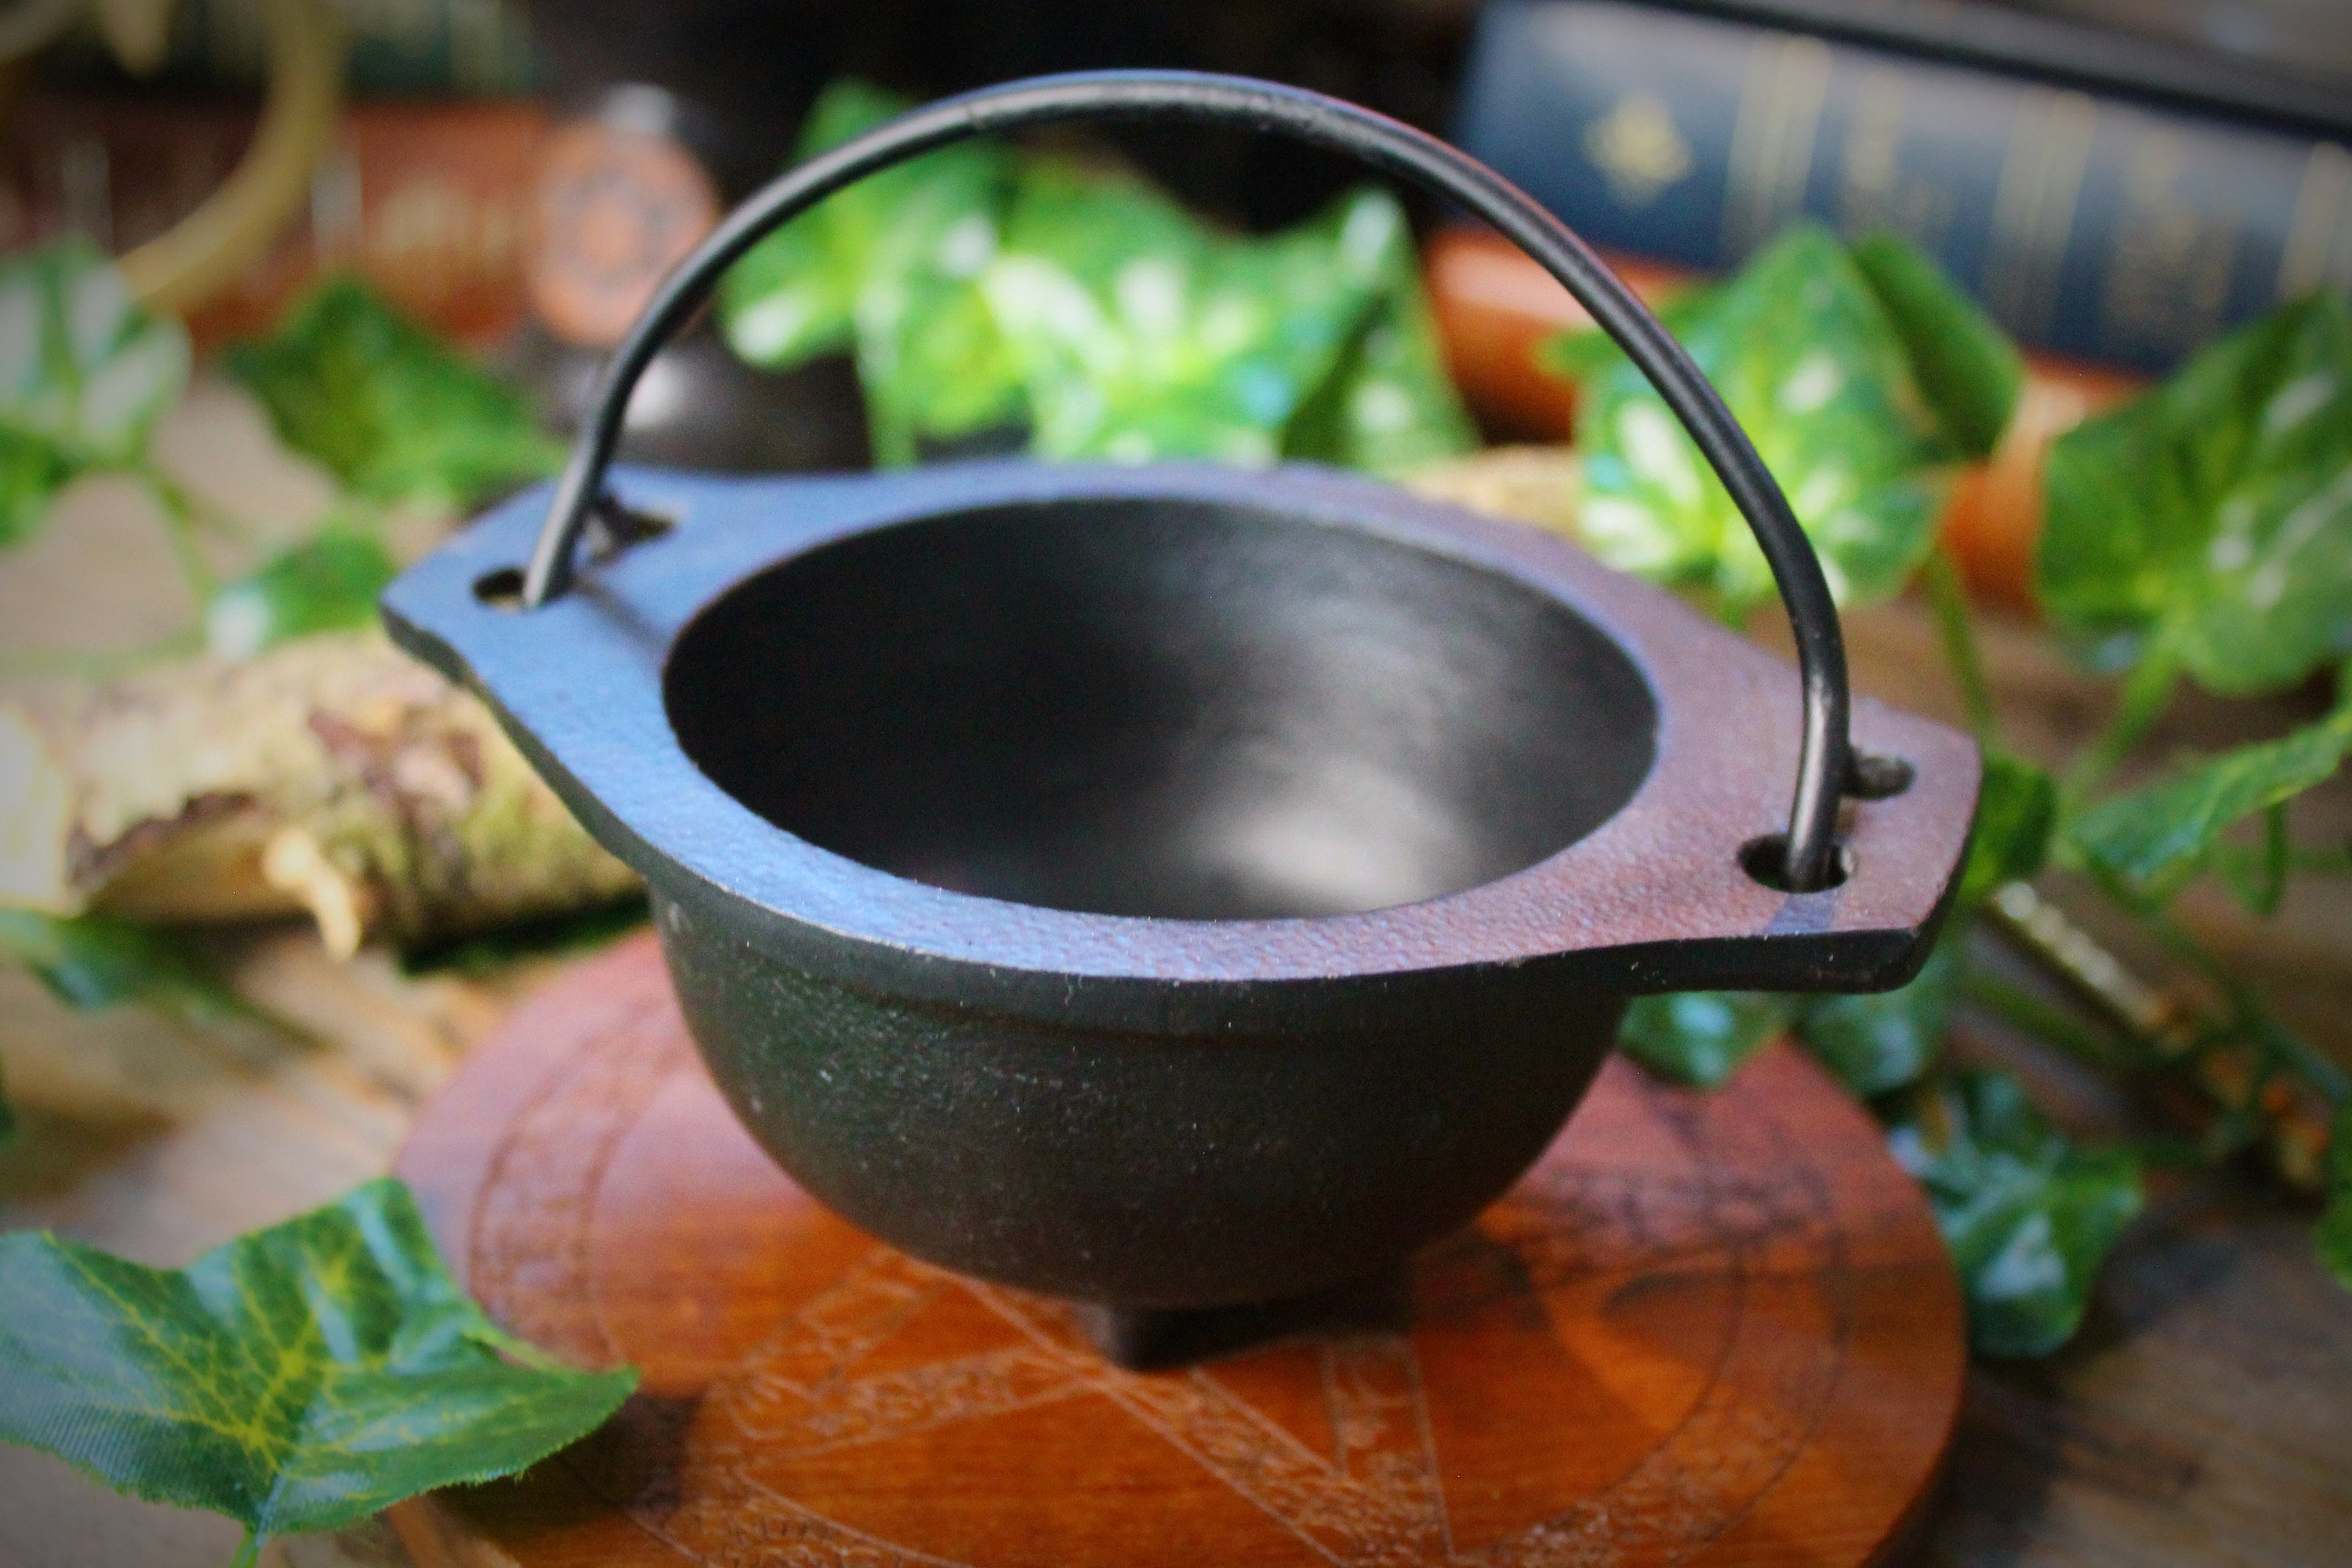 Cast Iron Cauldron Triple Moon Medium Witch & Magic Accessory for Wicca Potions Neopaganism Gift 